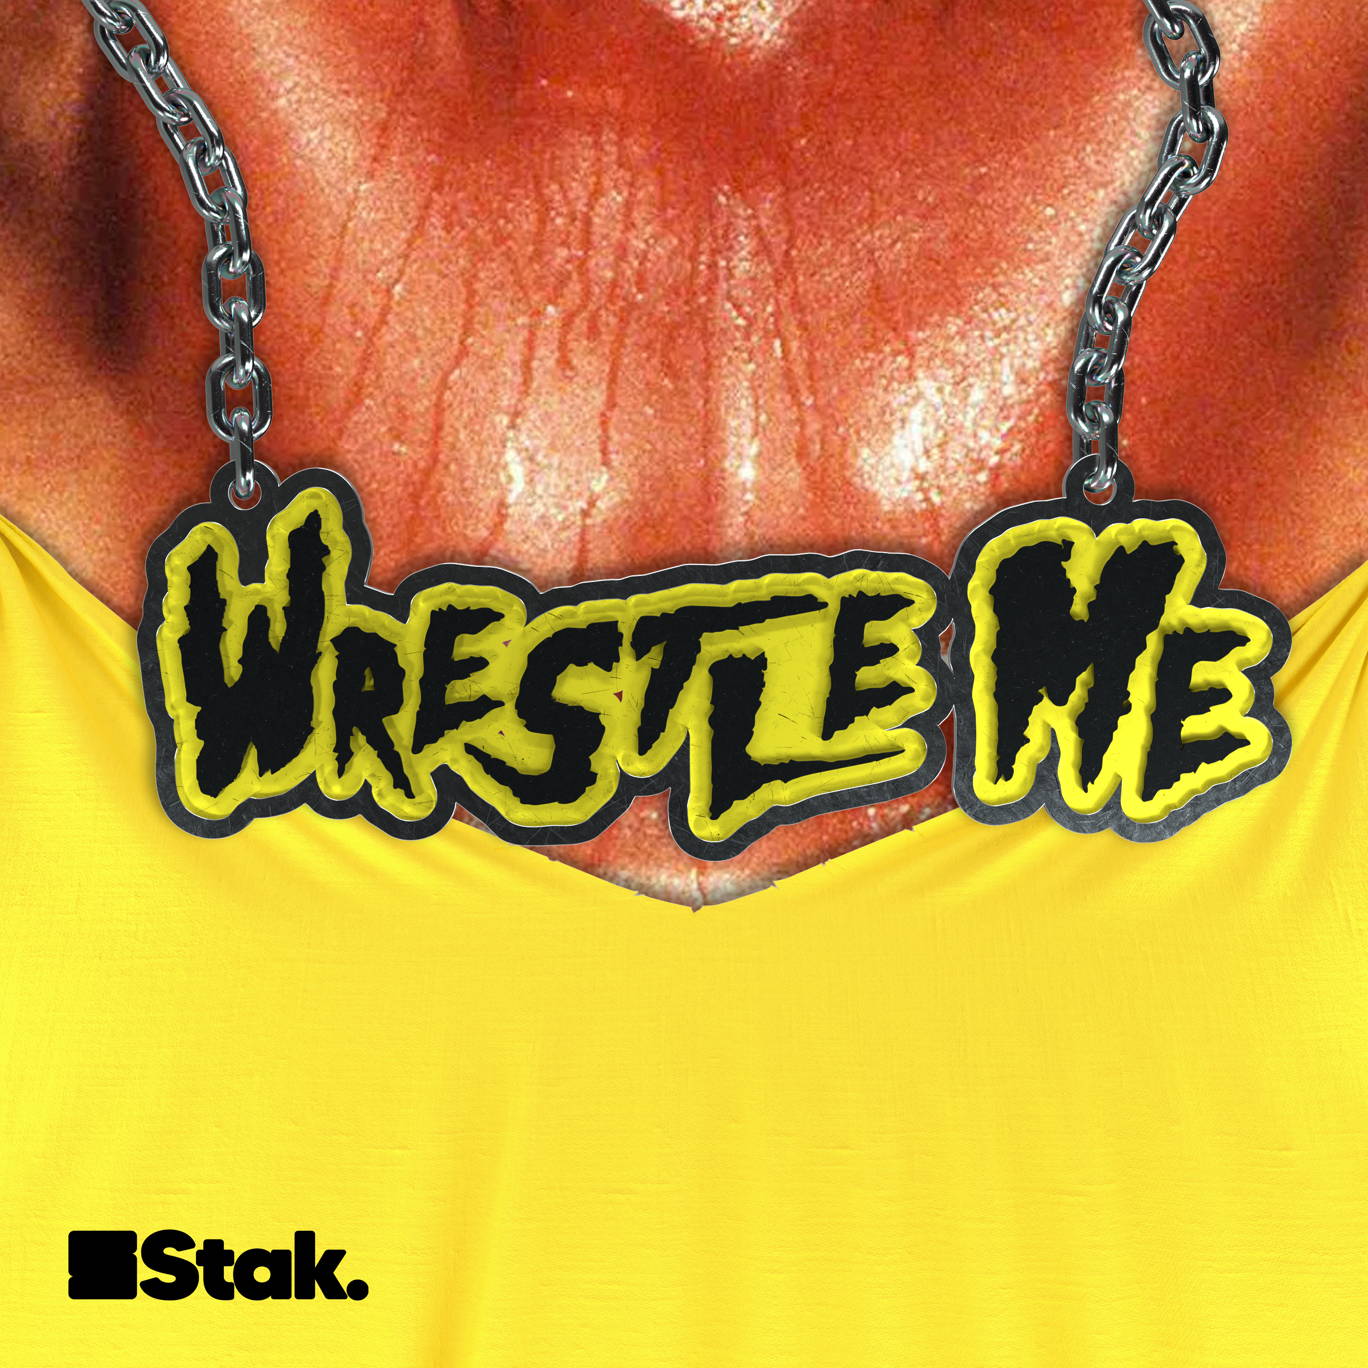 The artwork for the Wrestle Me podcast.